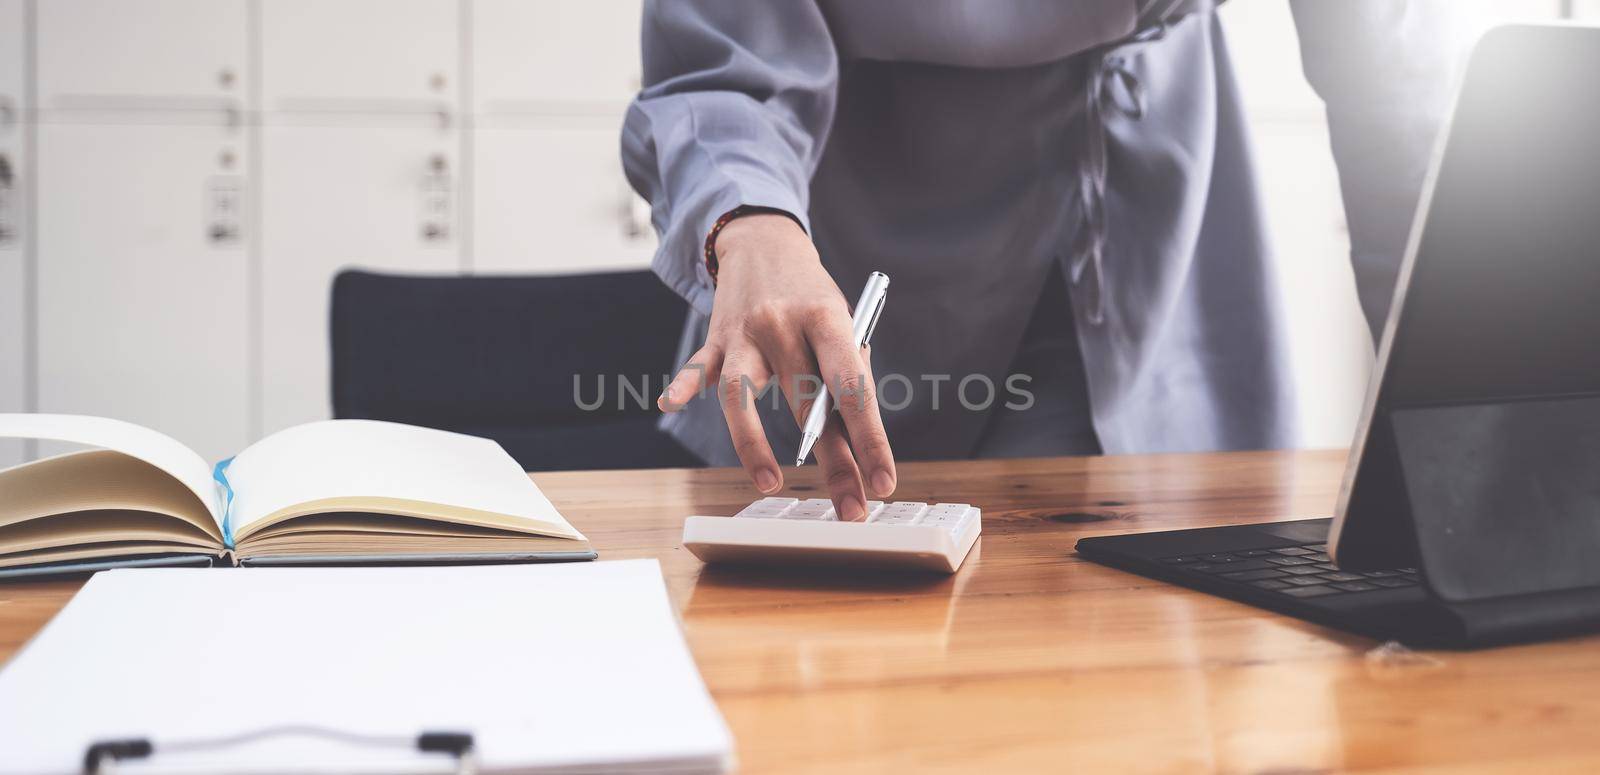 Accountant hand holding pen and using calculator to analyze sales growth in the global workplace market